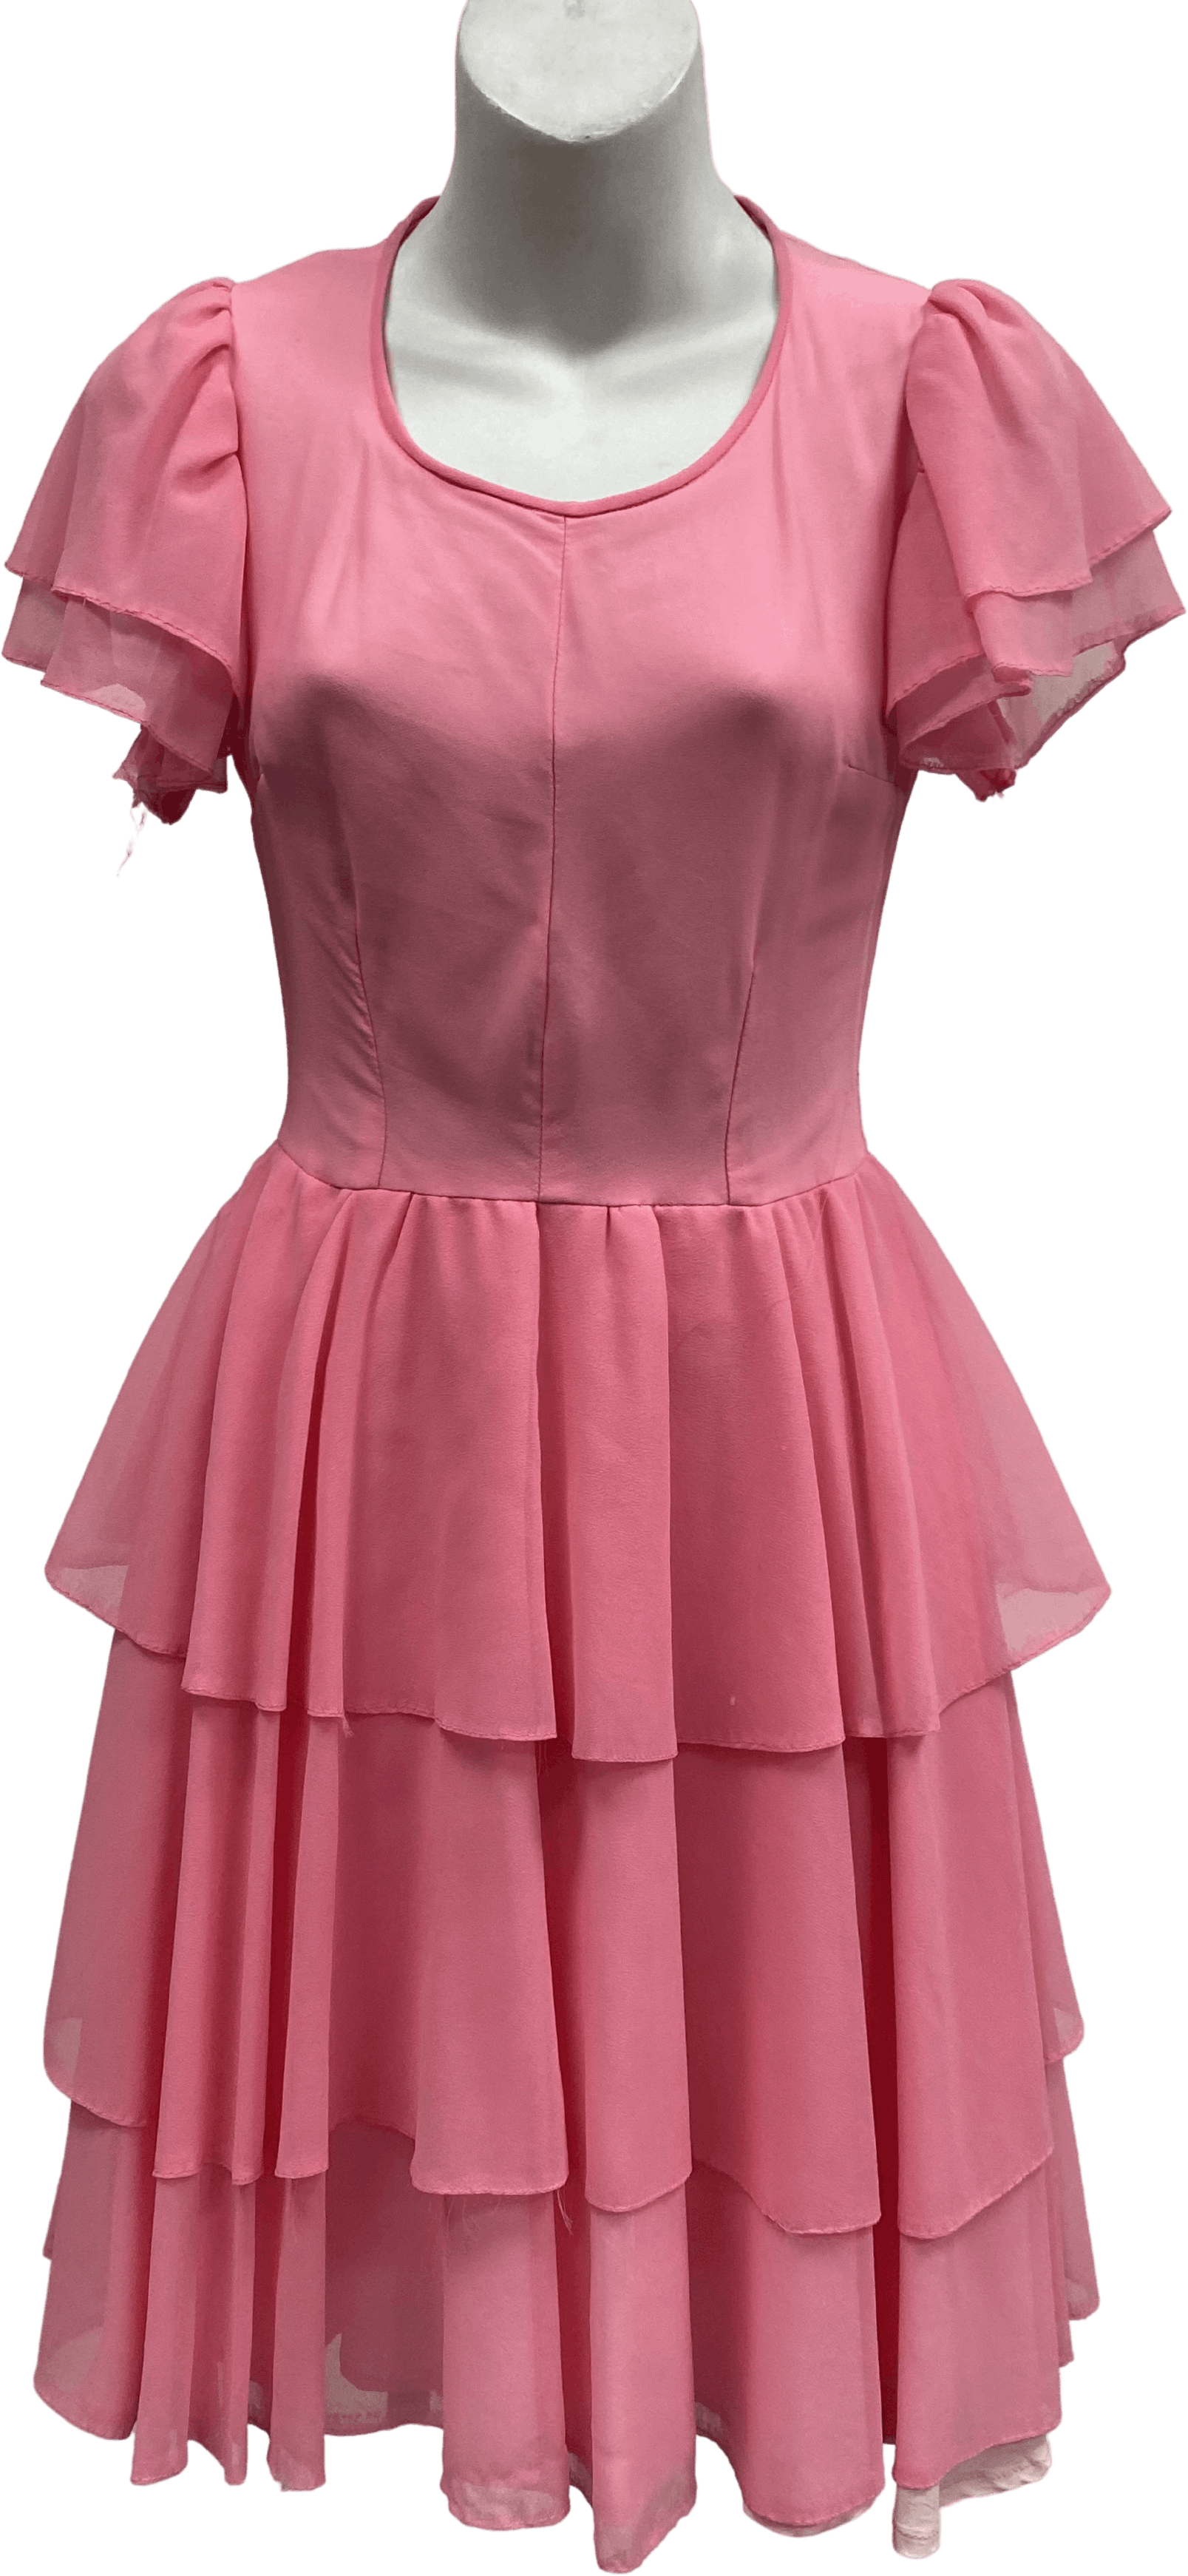 Vintage Pink Short Sleeve Tiered Ruffle Dress | Shop THRILLING